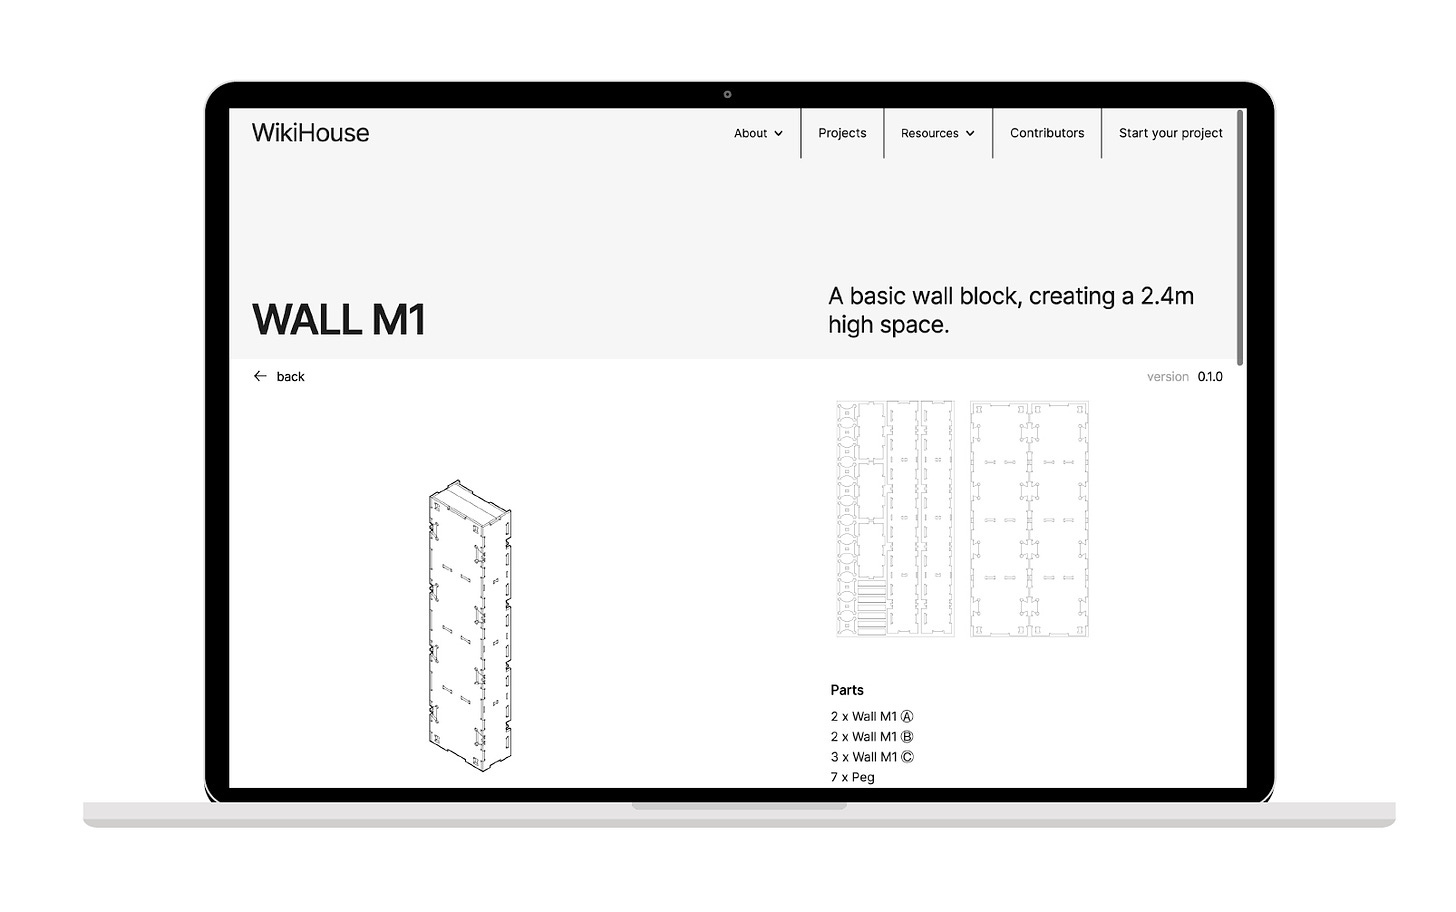 Image of an open laptop showing a mockup WikiHouse website. The page on show is for Wall M1 and shows an image of the Wall M1 block and its parts